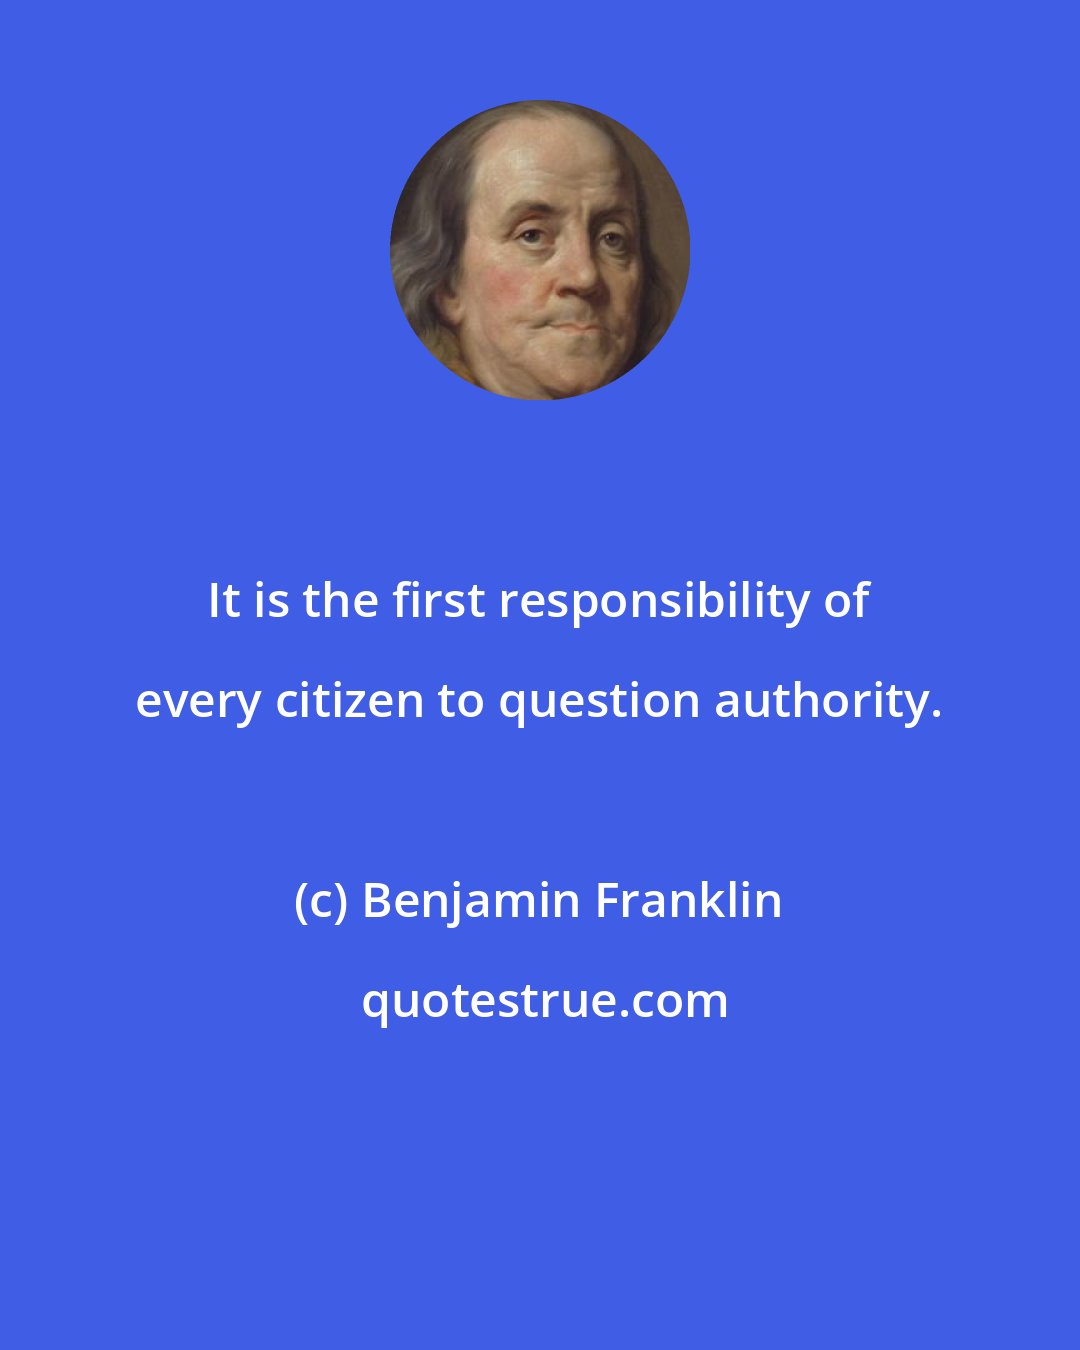 Benjamin Franklin: It is the first responsibility of every citizen to question authority.